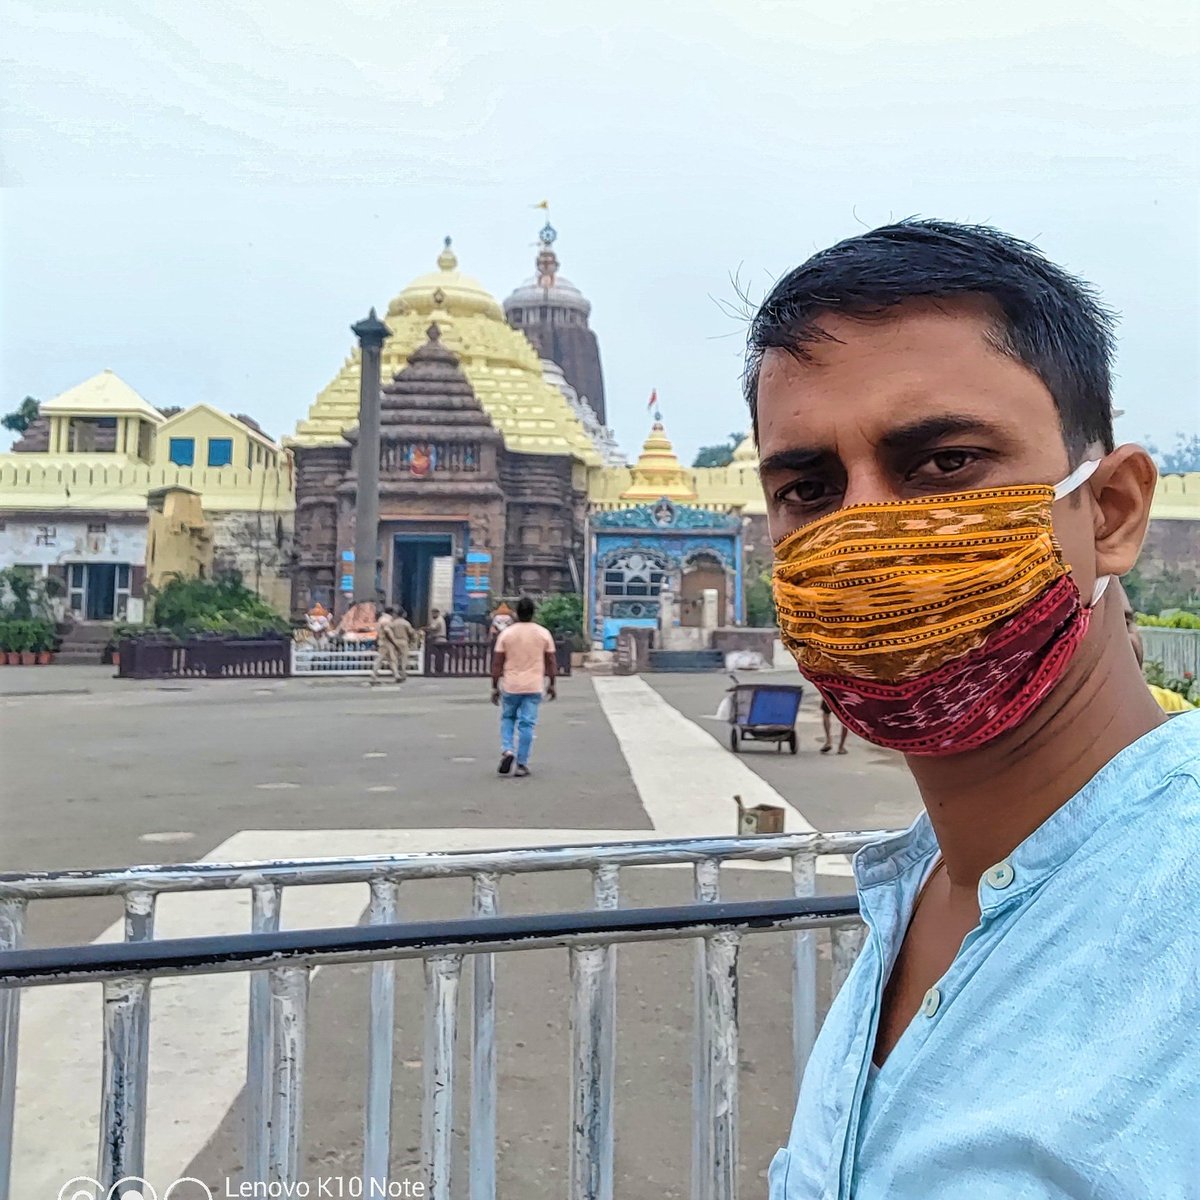 #NewProfilePic with Handwoven Sambalpuri #Mask and giving priority to our cultural values in everything!
#SambalpuriMask #TheNewInnovation 
#covidmask